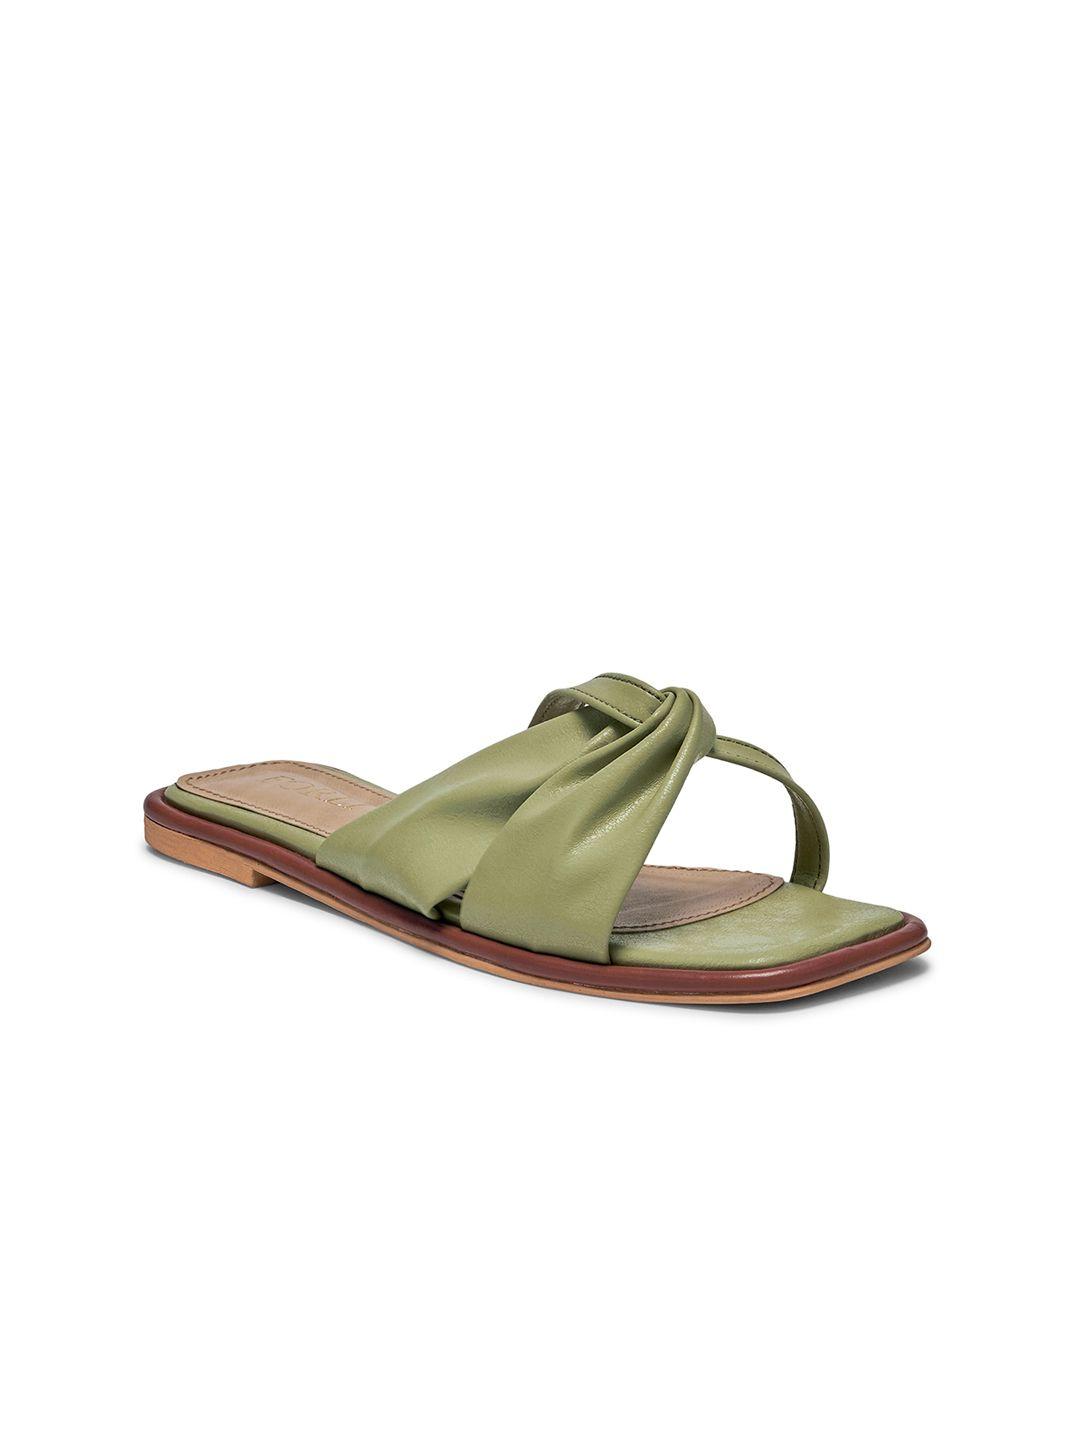 forli-women-textured-leather-no-back-straps-open-toe-flats